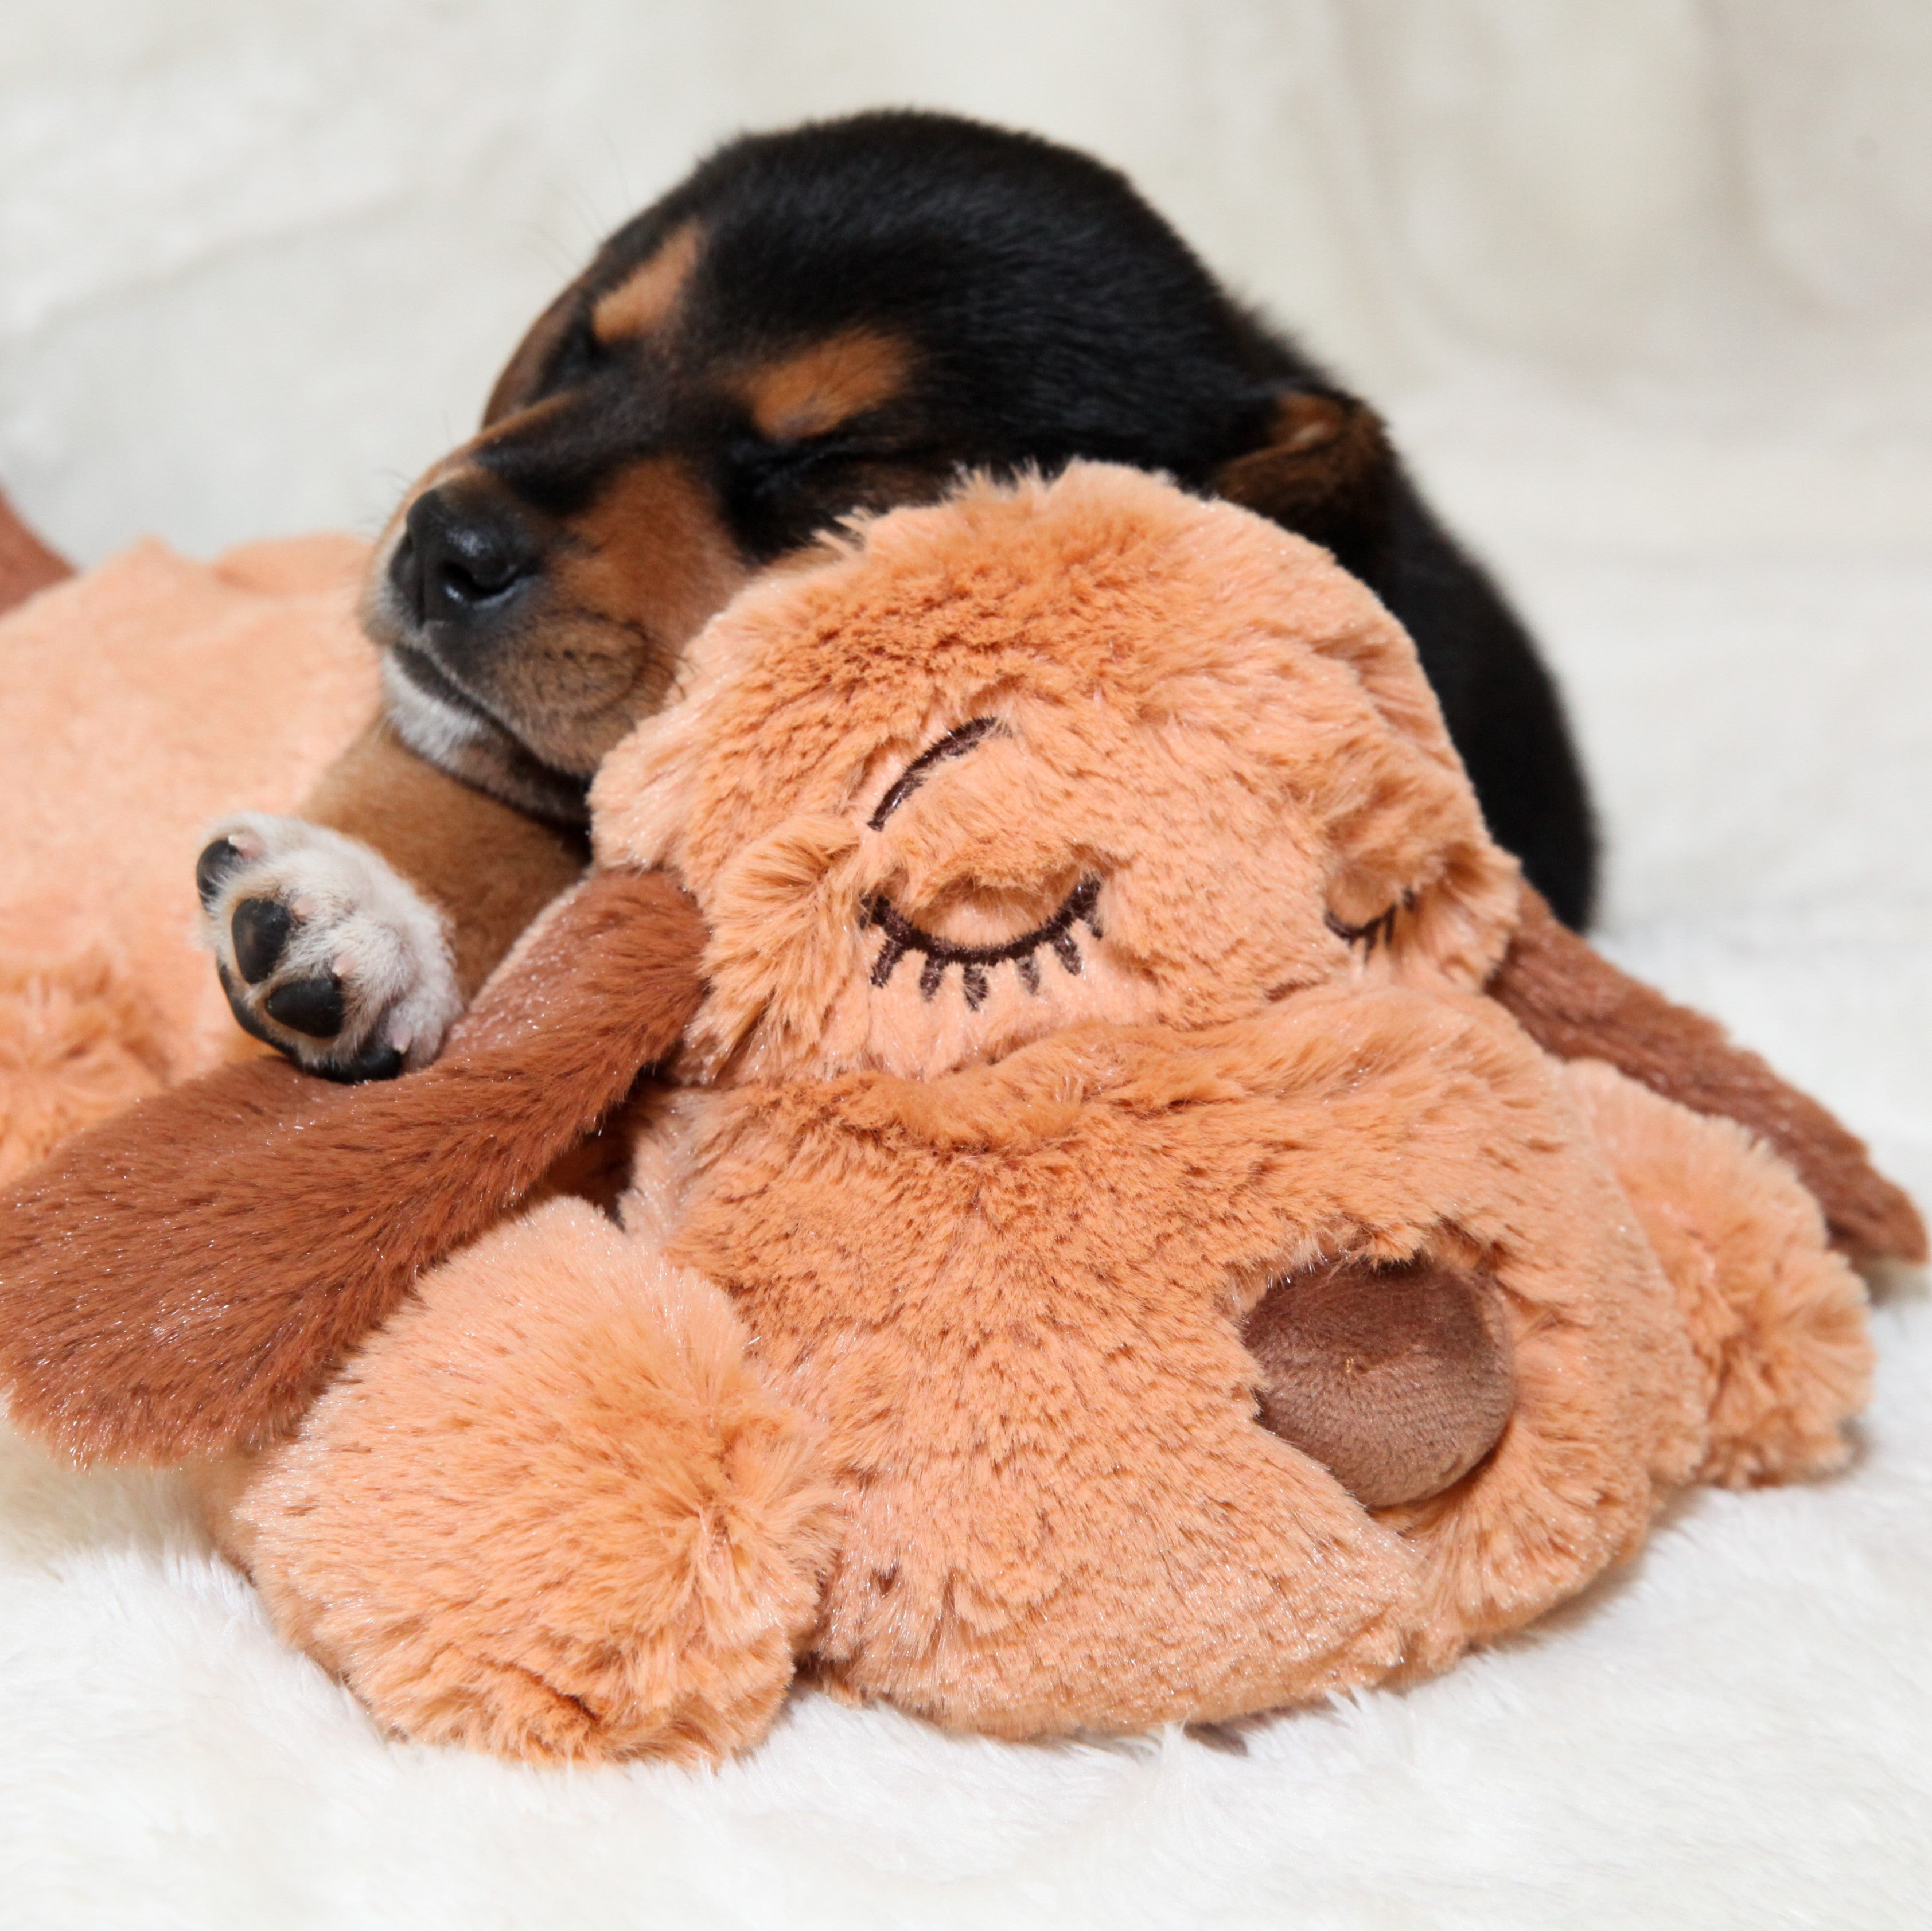 stuffed puppy with heartbeat